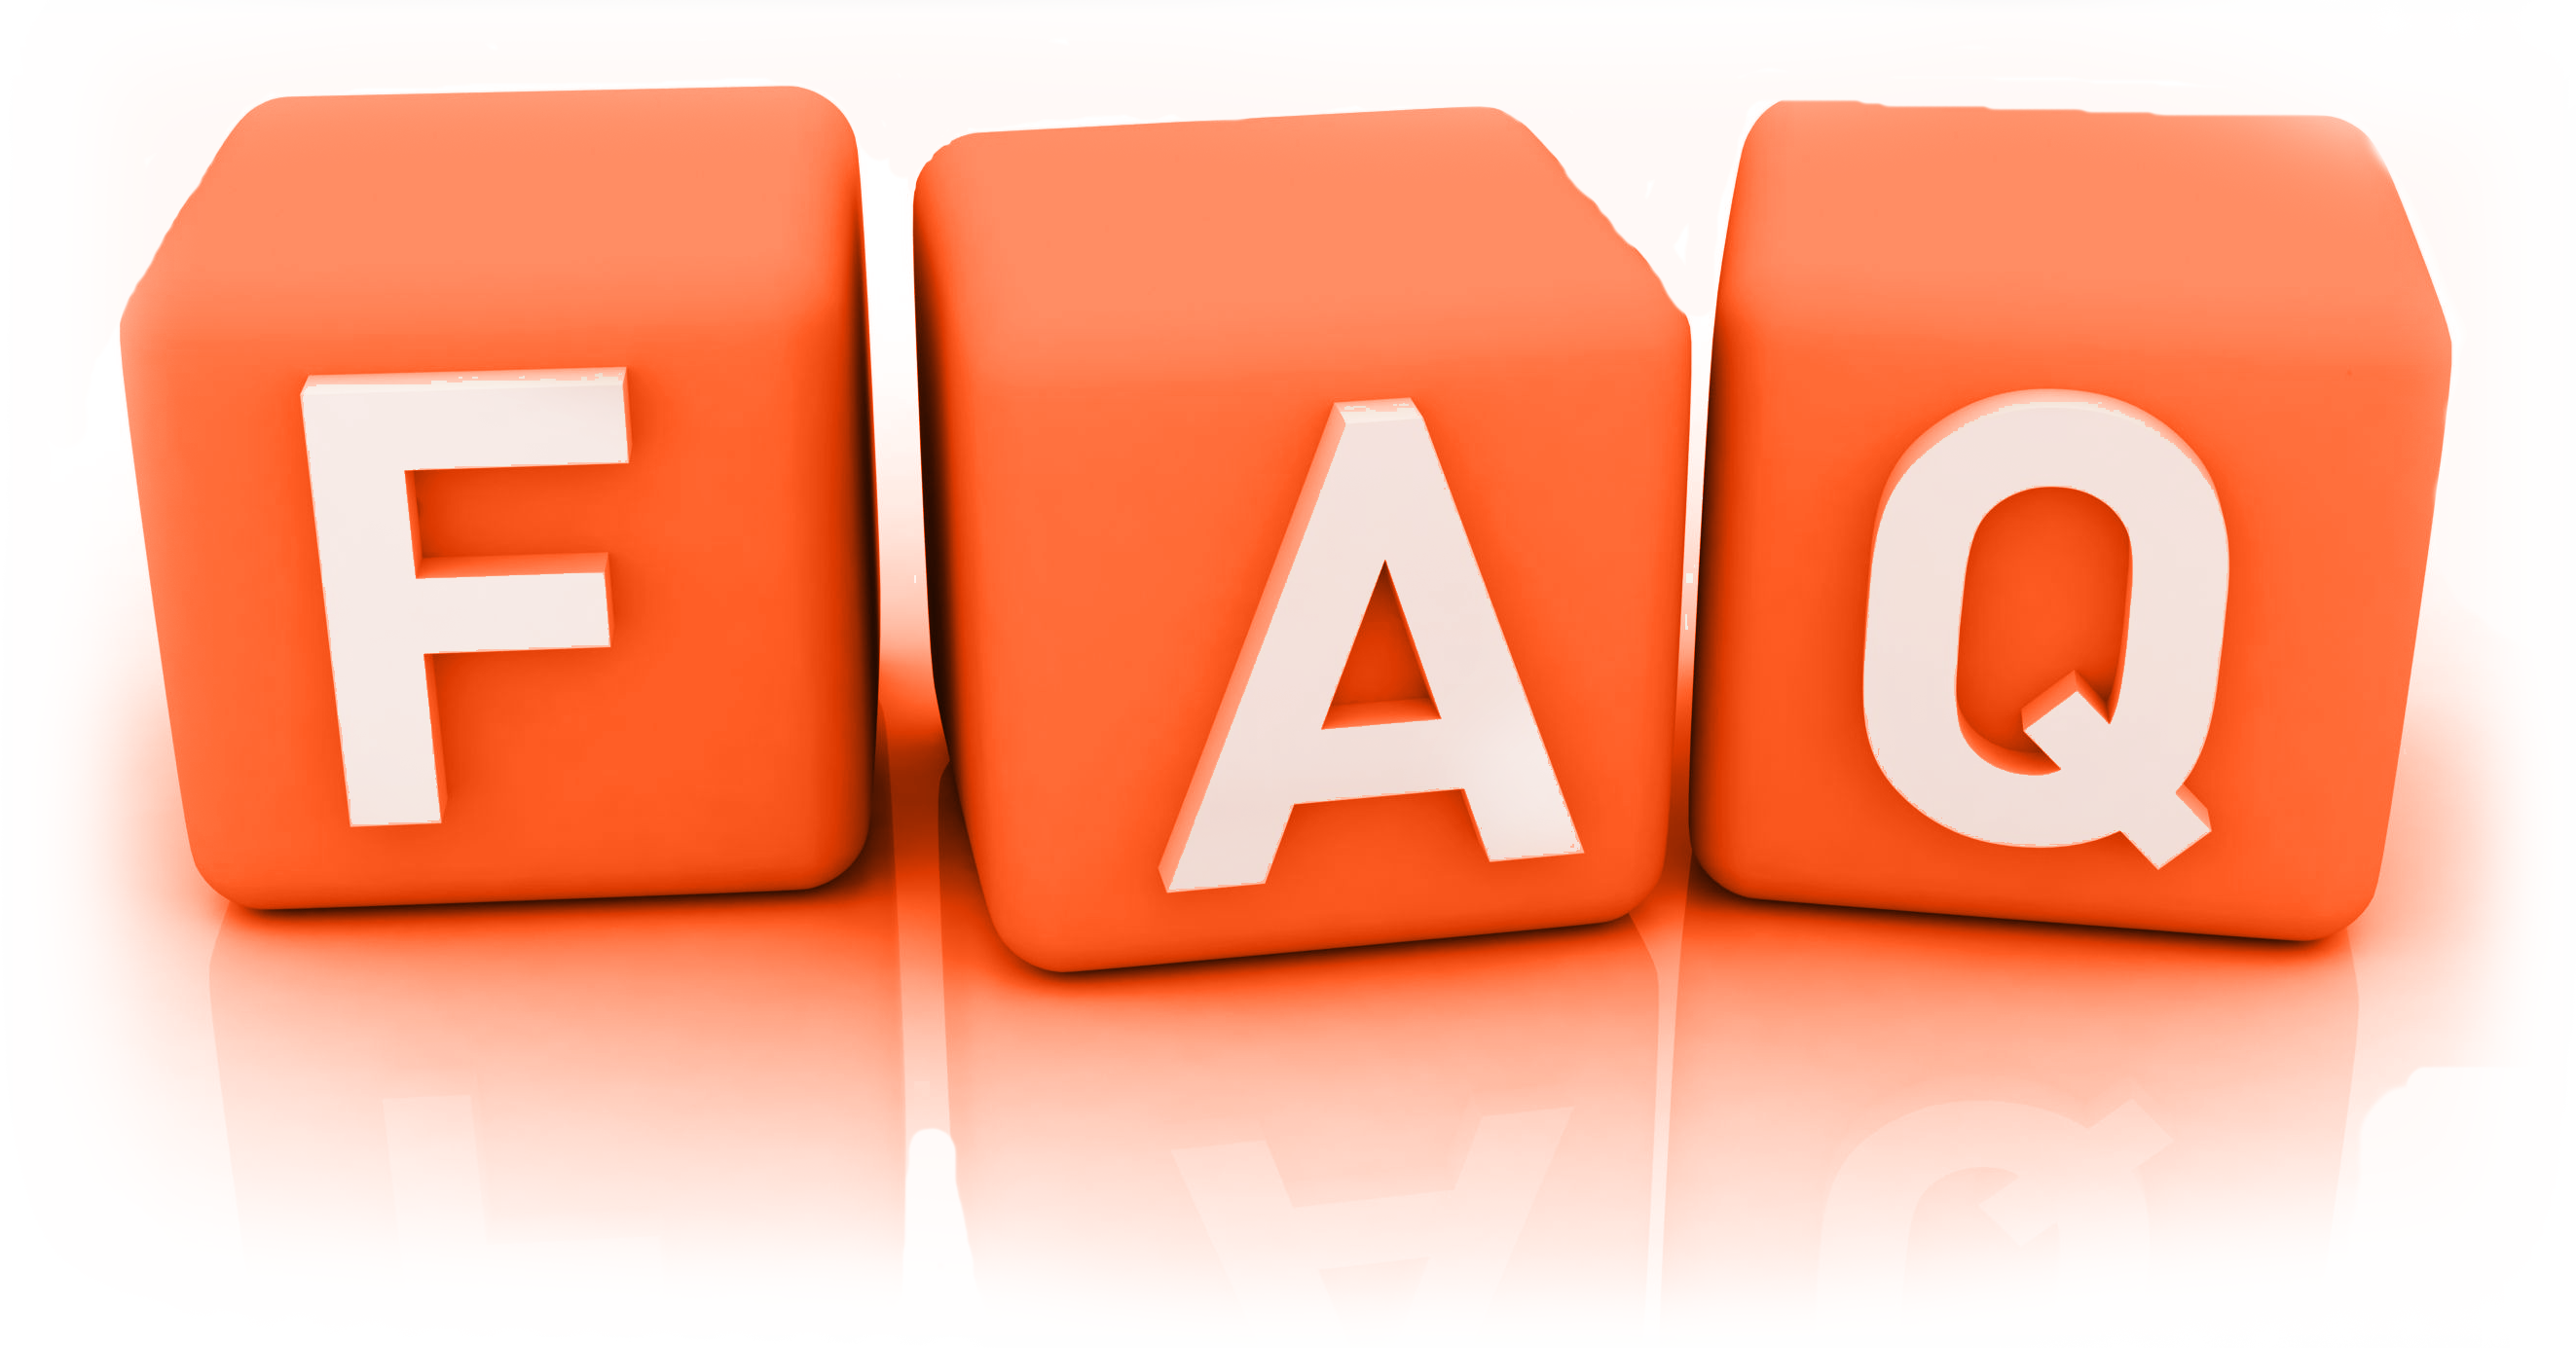 FAQ Frequently Asked Questions PNG Pic